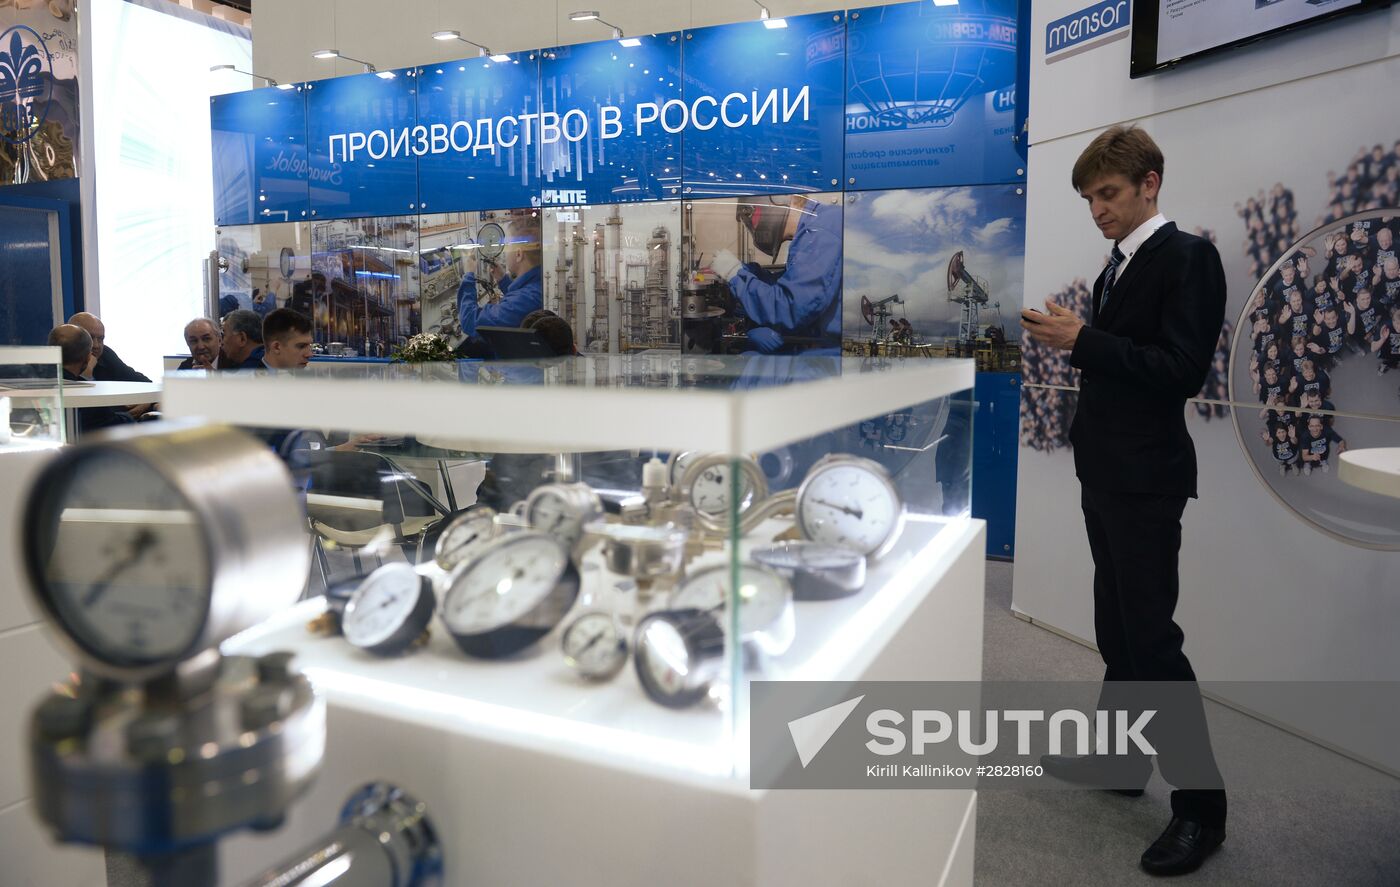 NEFTEGAZ-2016 international exhibition of equipment and technology for oil and gas industry